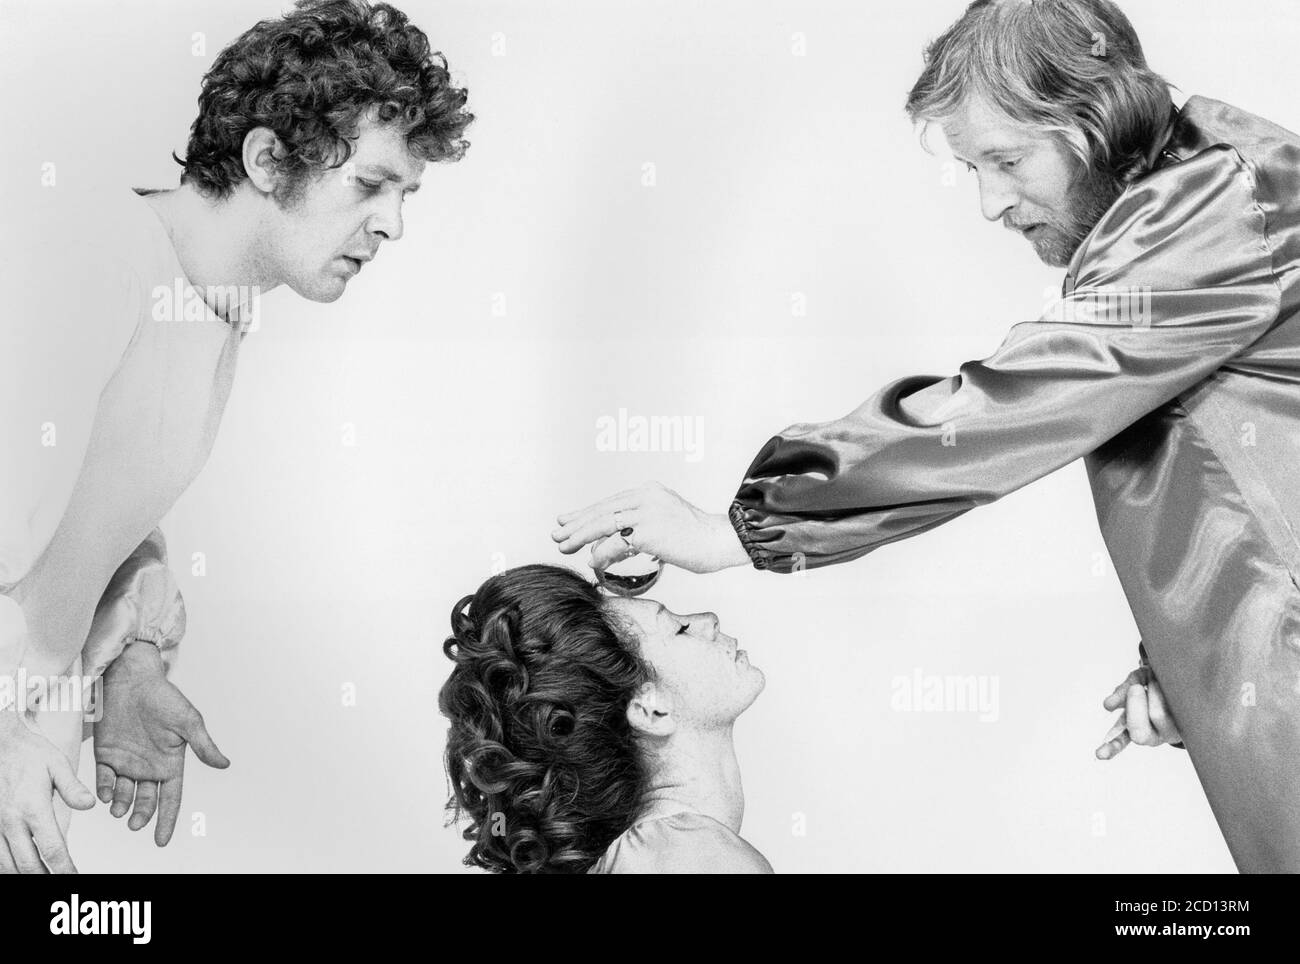 l-r: John Kane (Puck), Sara Kestelman (Titania), Alan Howard (Oberon) in A MIDSUMMER NIGHT'S DREAM by Shakespeare at the Royal Shakespeare Company (RSC), Aldwych Theatre, London WC2  10/06/1971 design: Sally Jacobs  director: Peter Brook Stock Photo